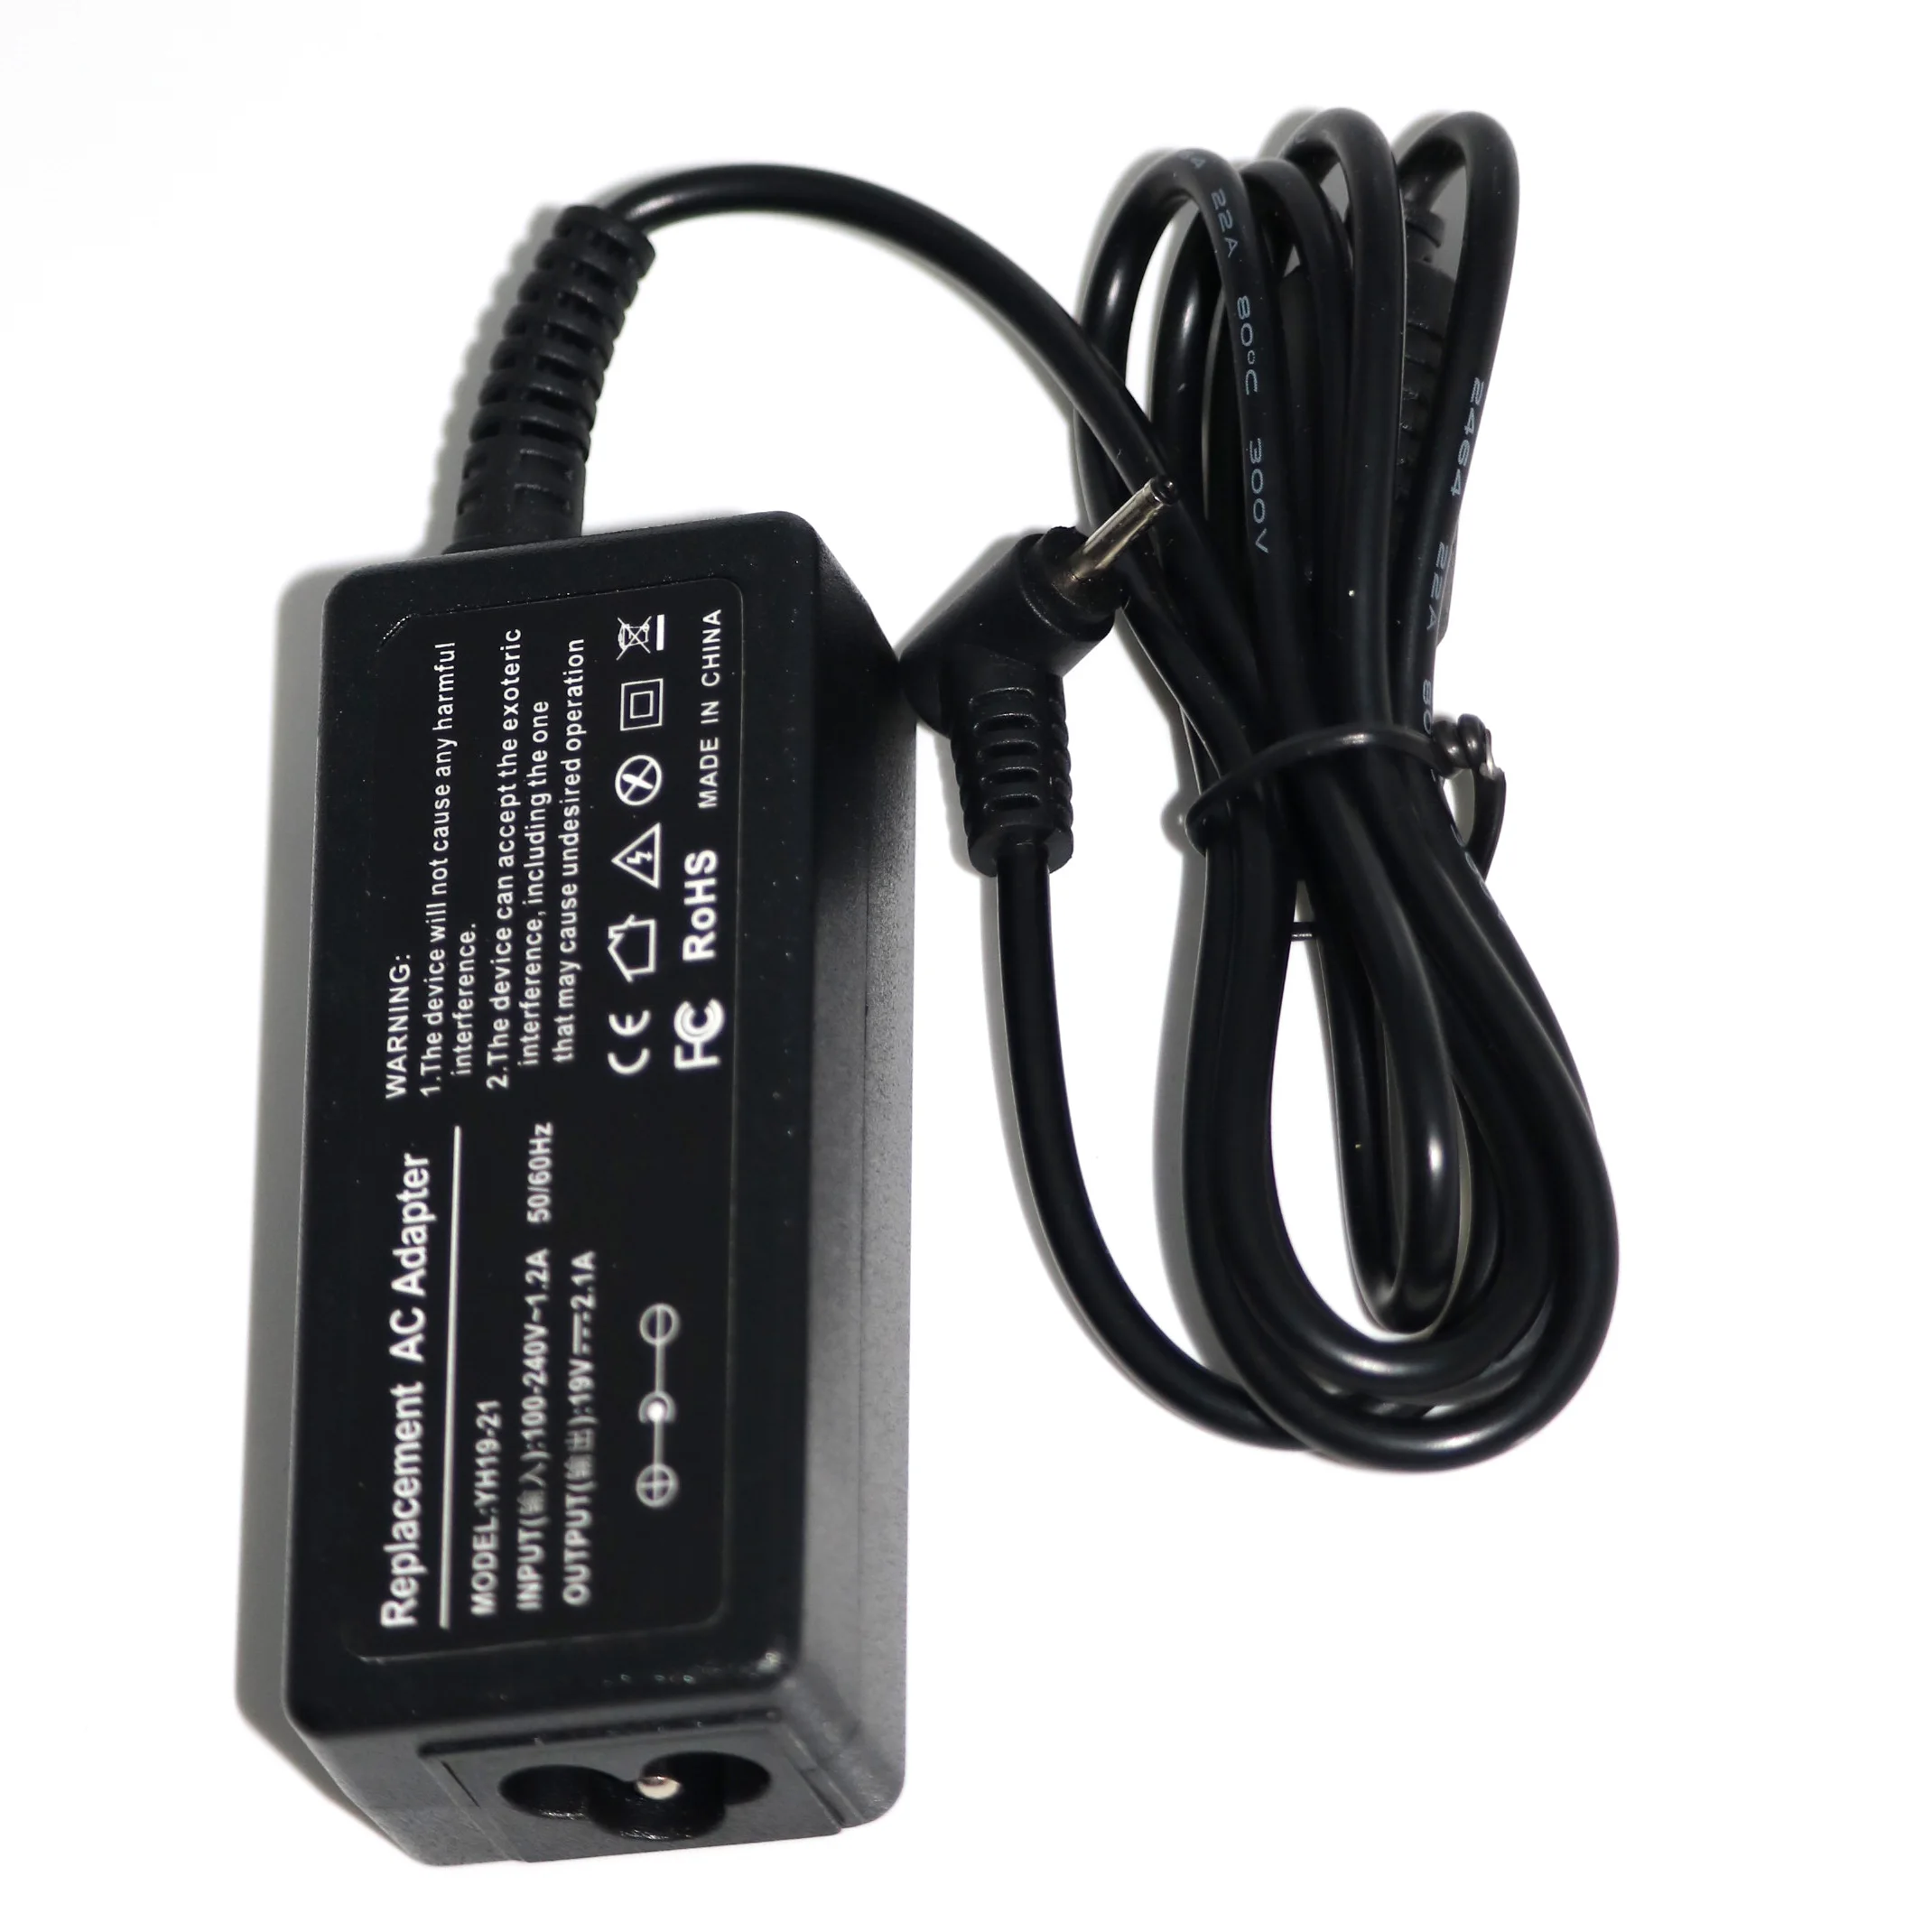 

19V 2.1A AC Power Adapter For asus Eee PC 1001 1001P 1005 1005HAB 1008HA 1011PX 1015PW 1015PX 1015PEB 1005HA 1005PE